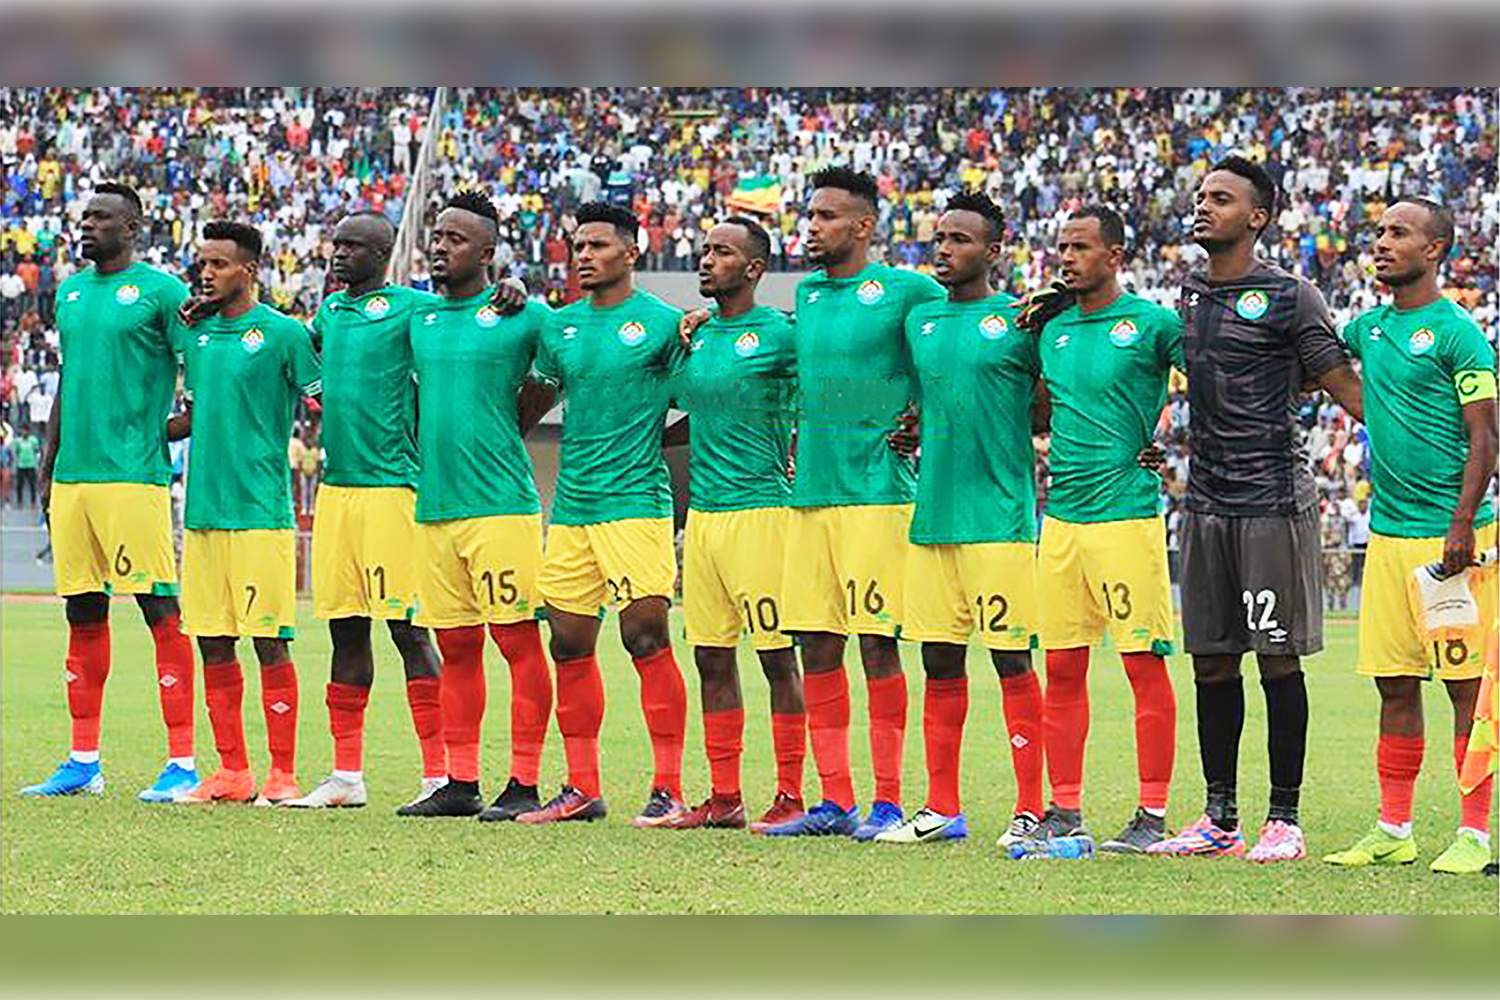 Speculation arises Ethiopia may walk out from Nations Cup qualification